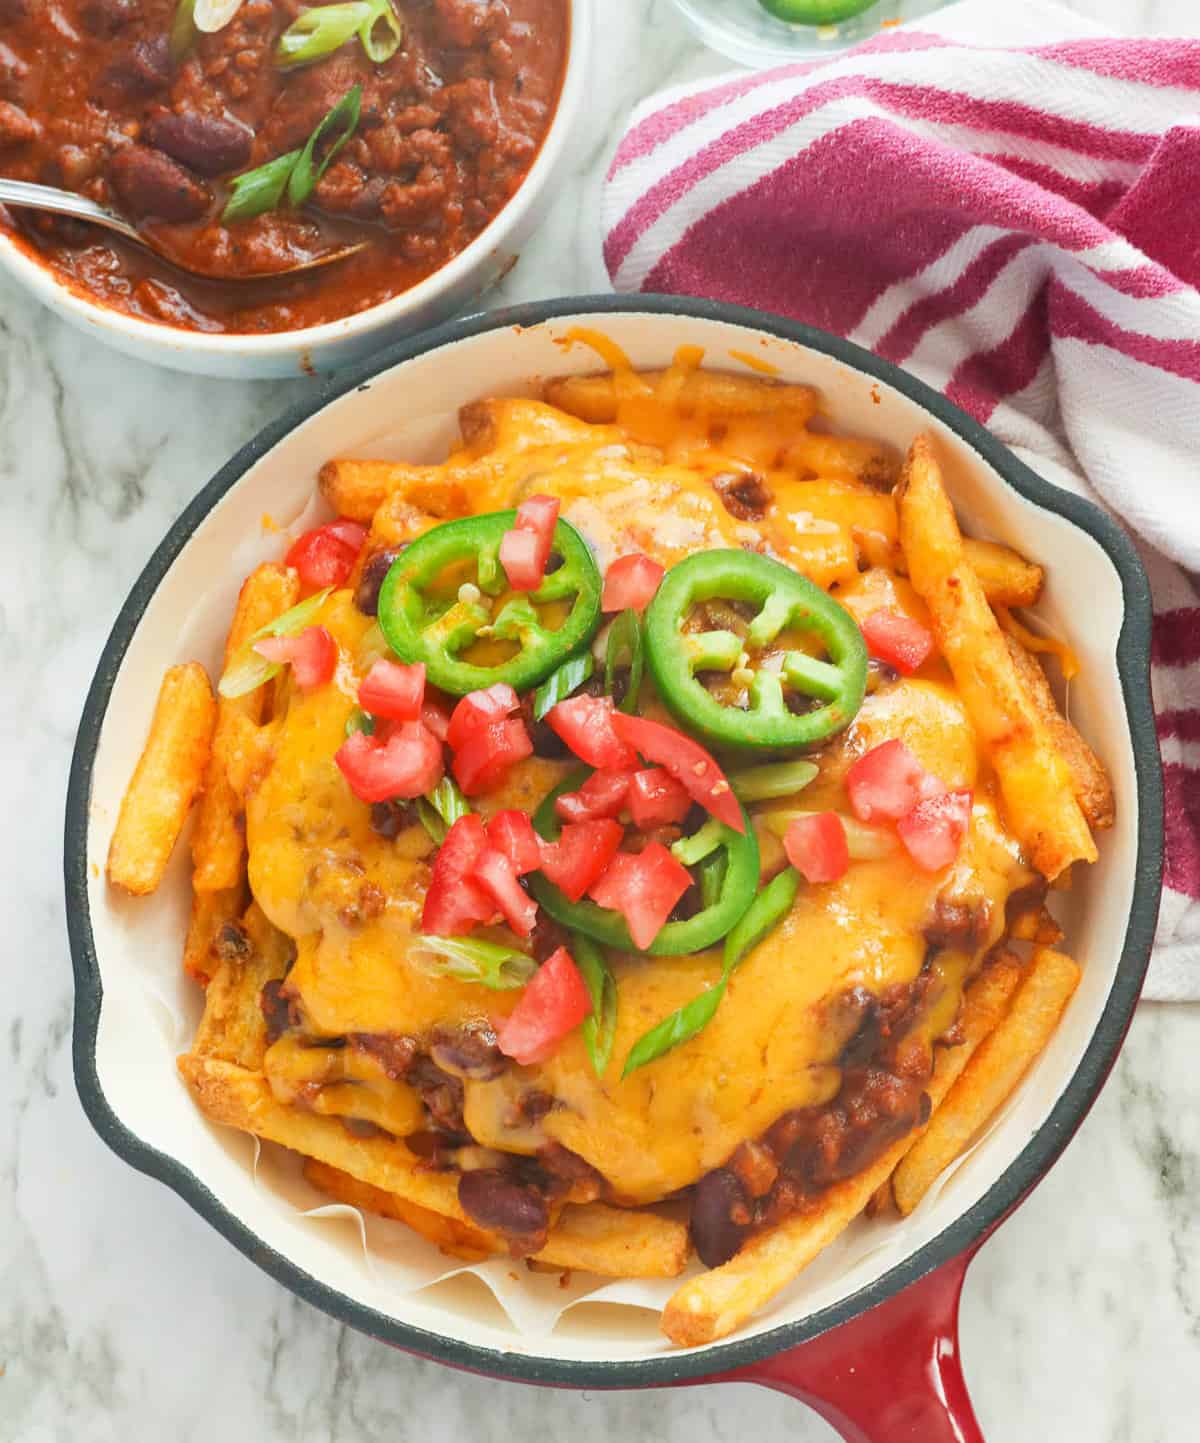 A skillet full of Texas chili cheese fries with more chili in the background